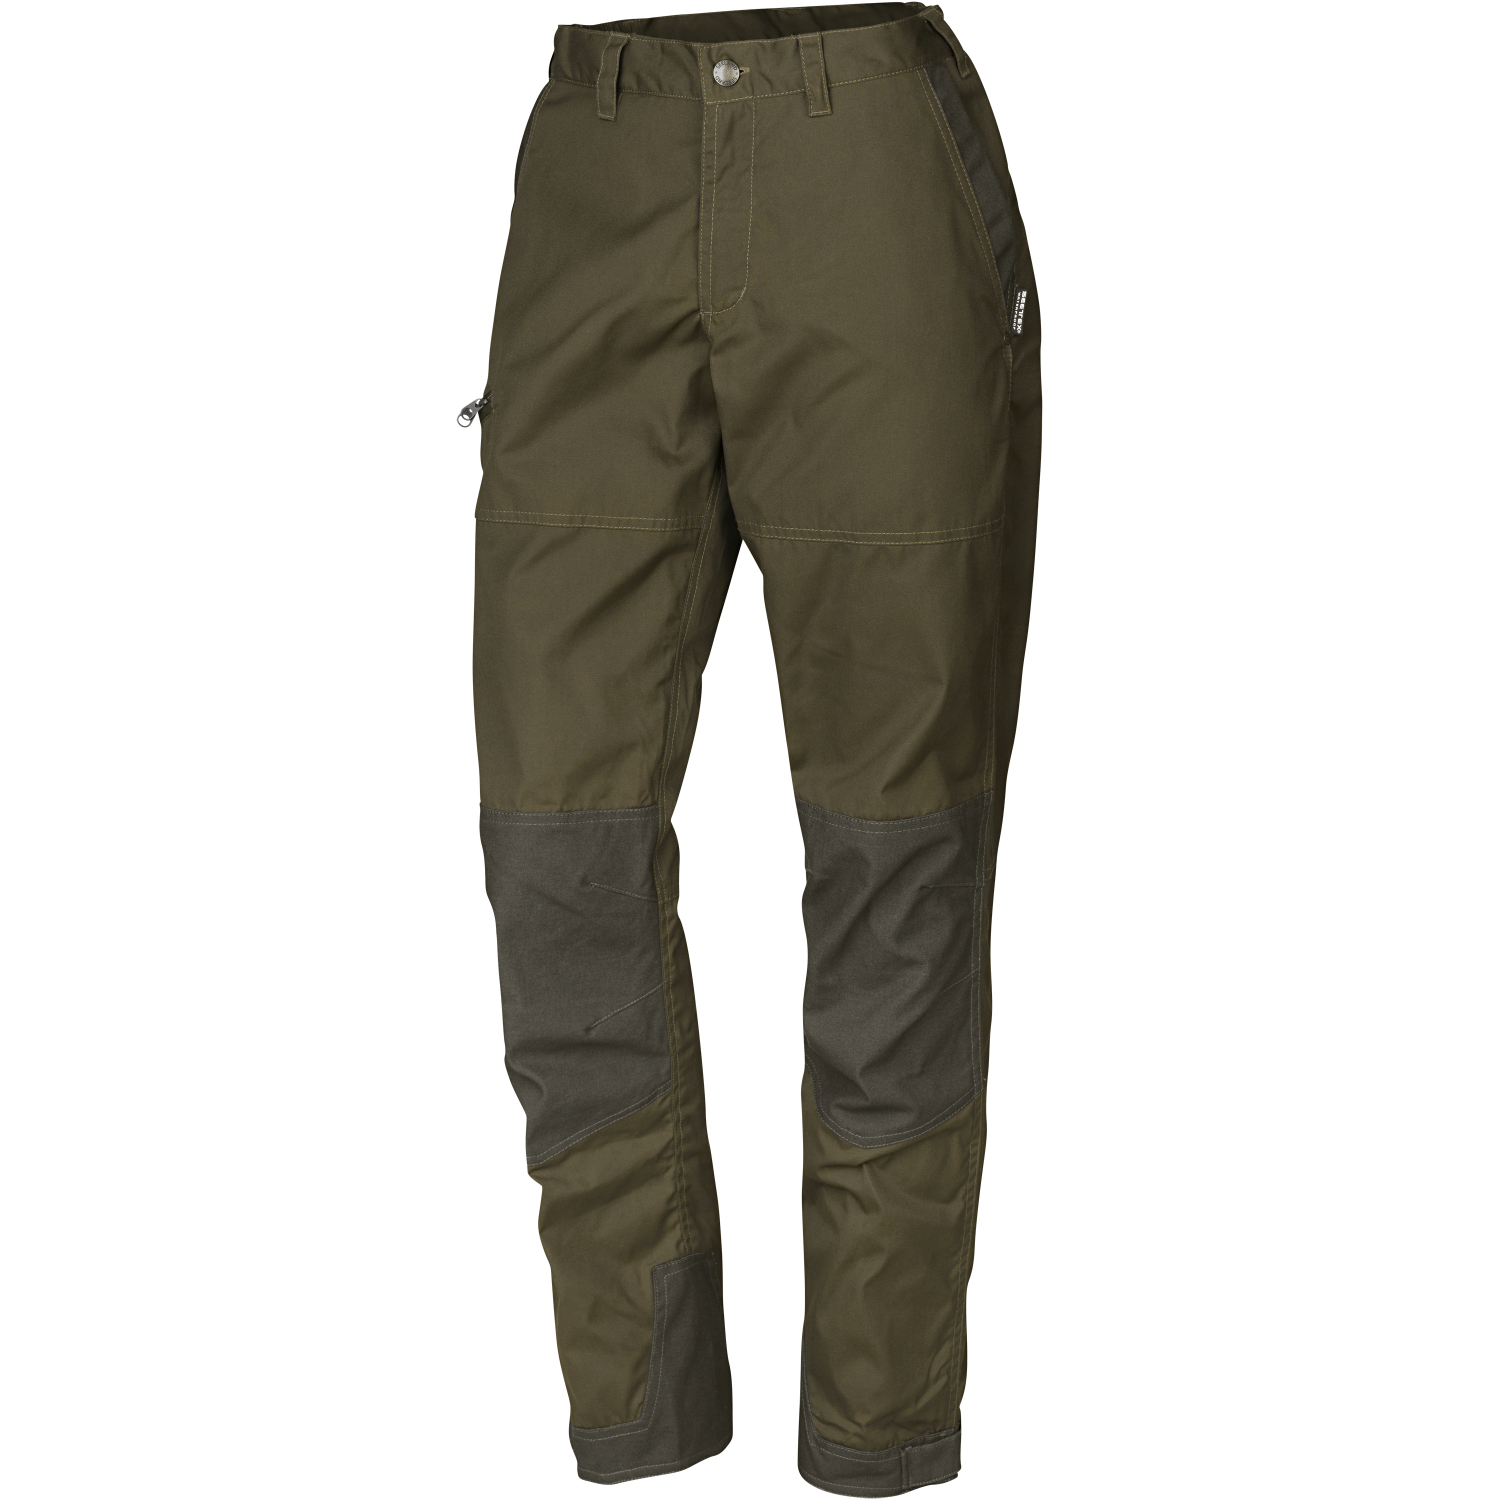 Cargo Pants For Women Our Top Recommendations  Times of India July 2023